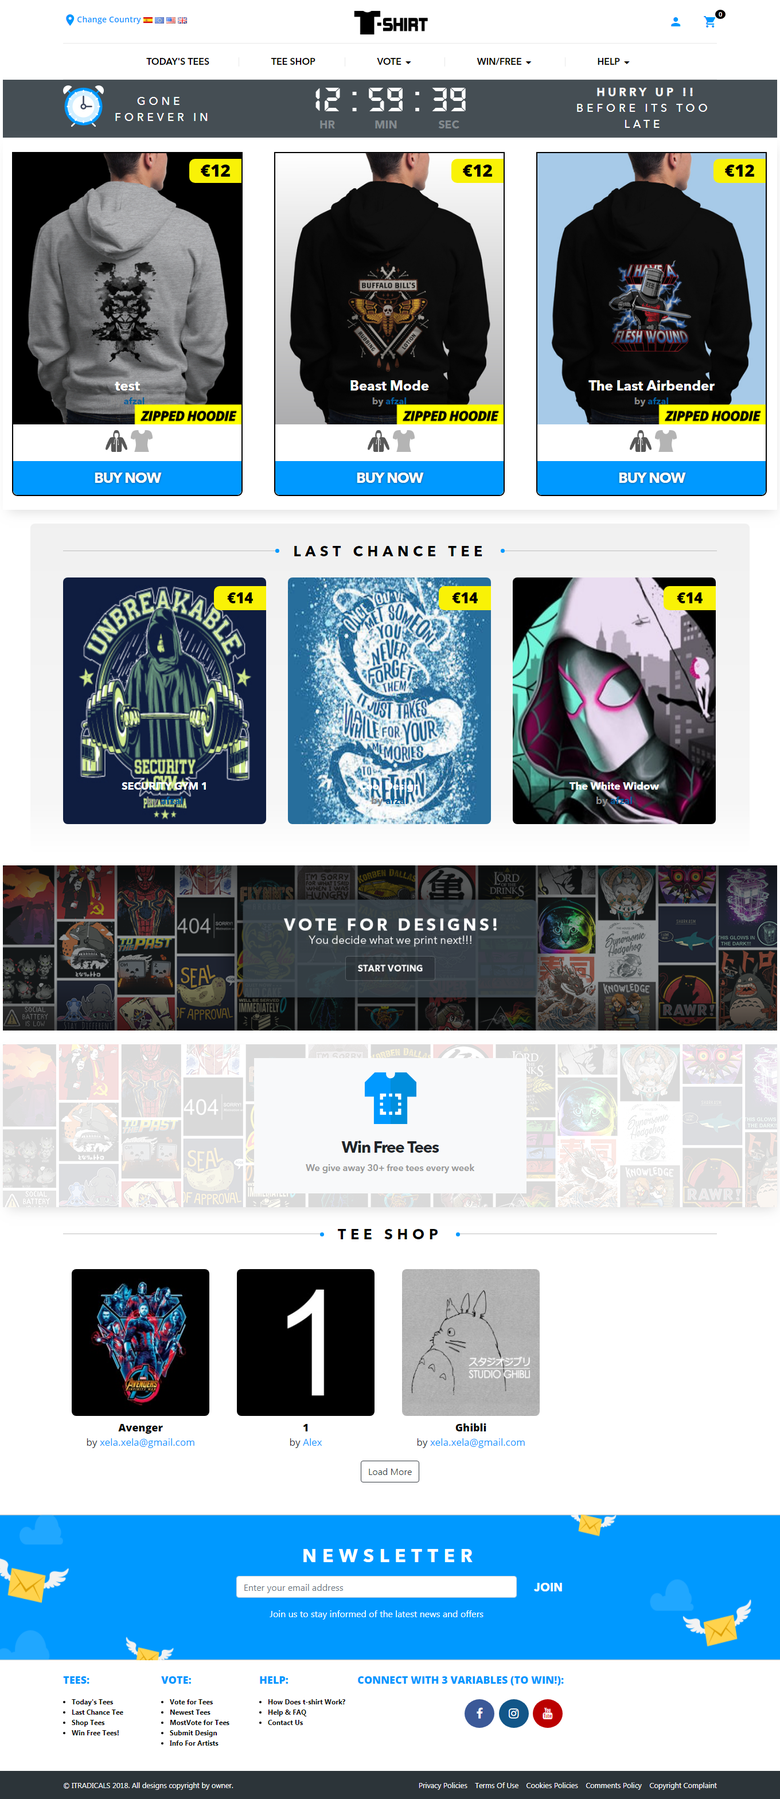 Online store for tees lover :)